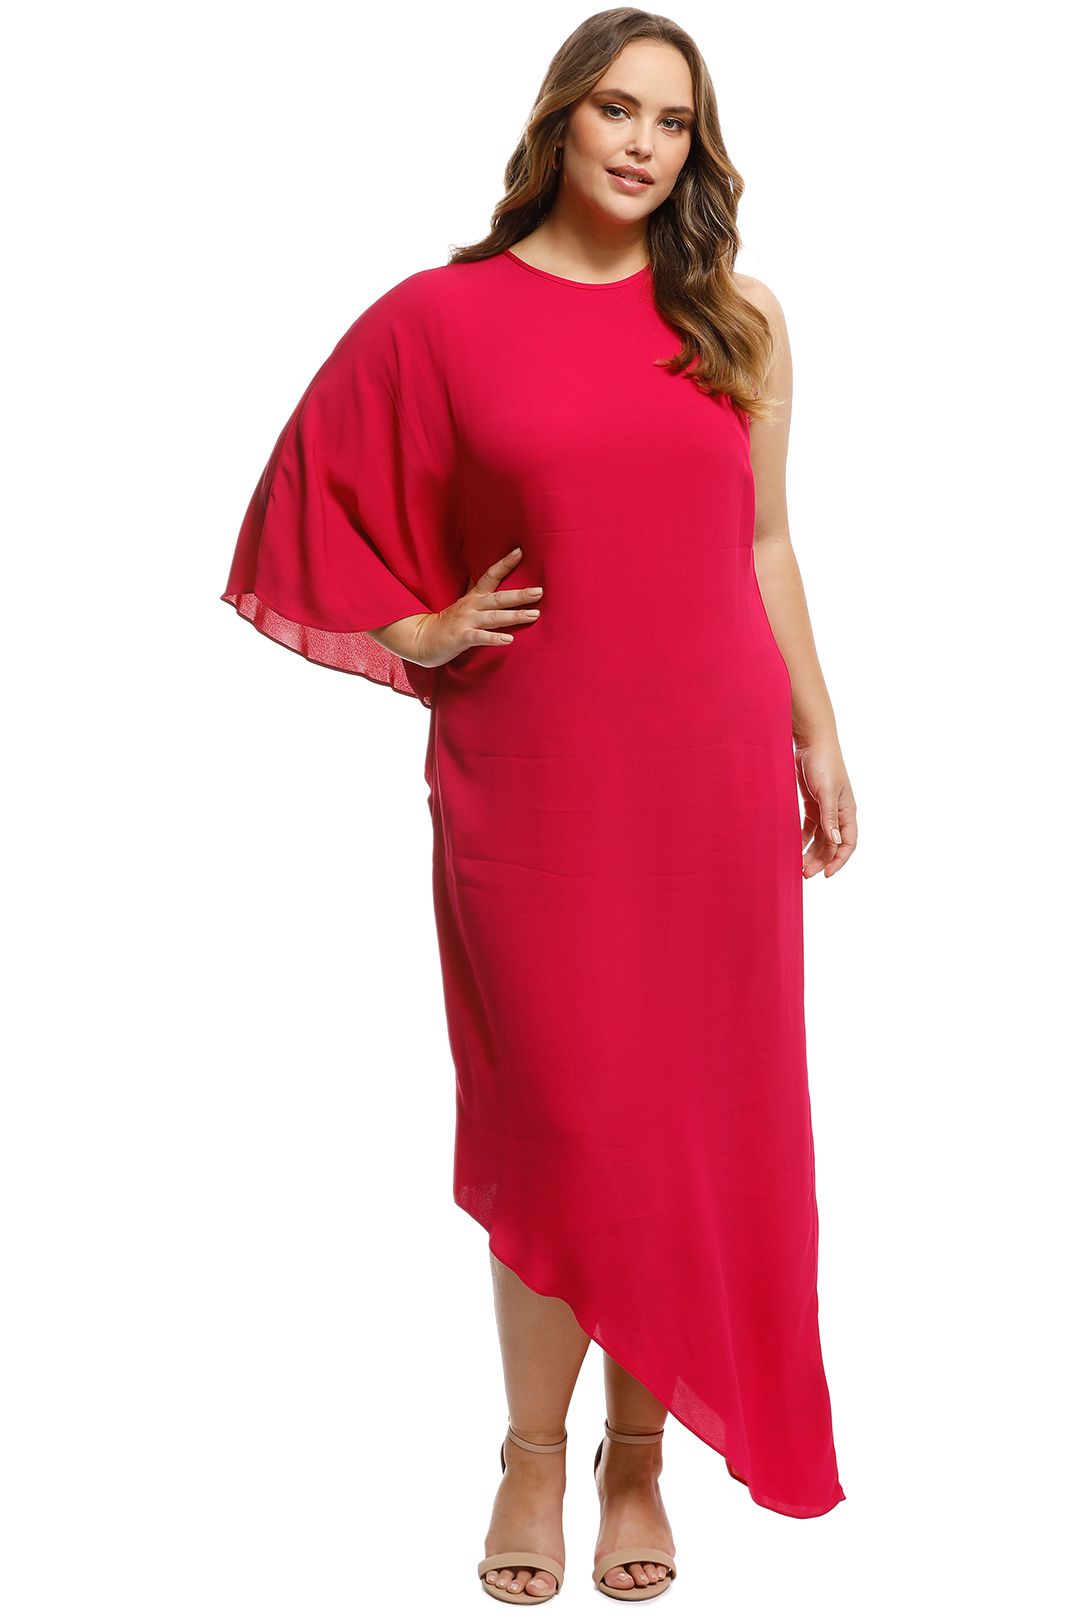 Ginger and Smart - Stasis Maxi Dress - Pink - Front